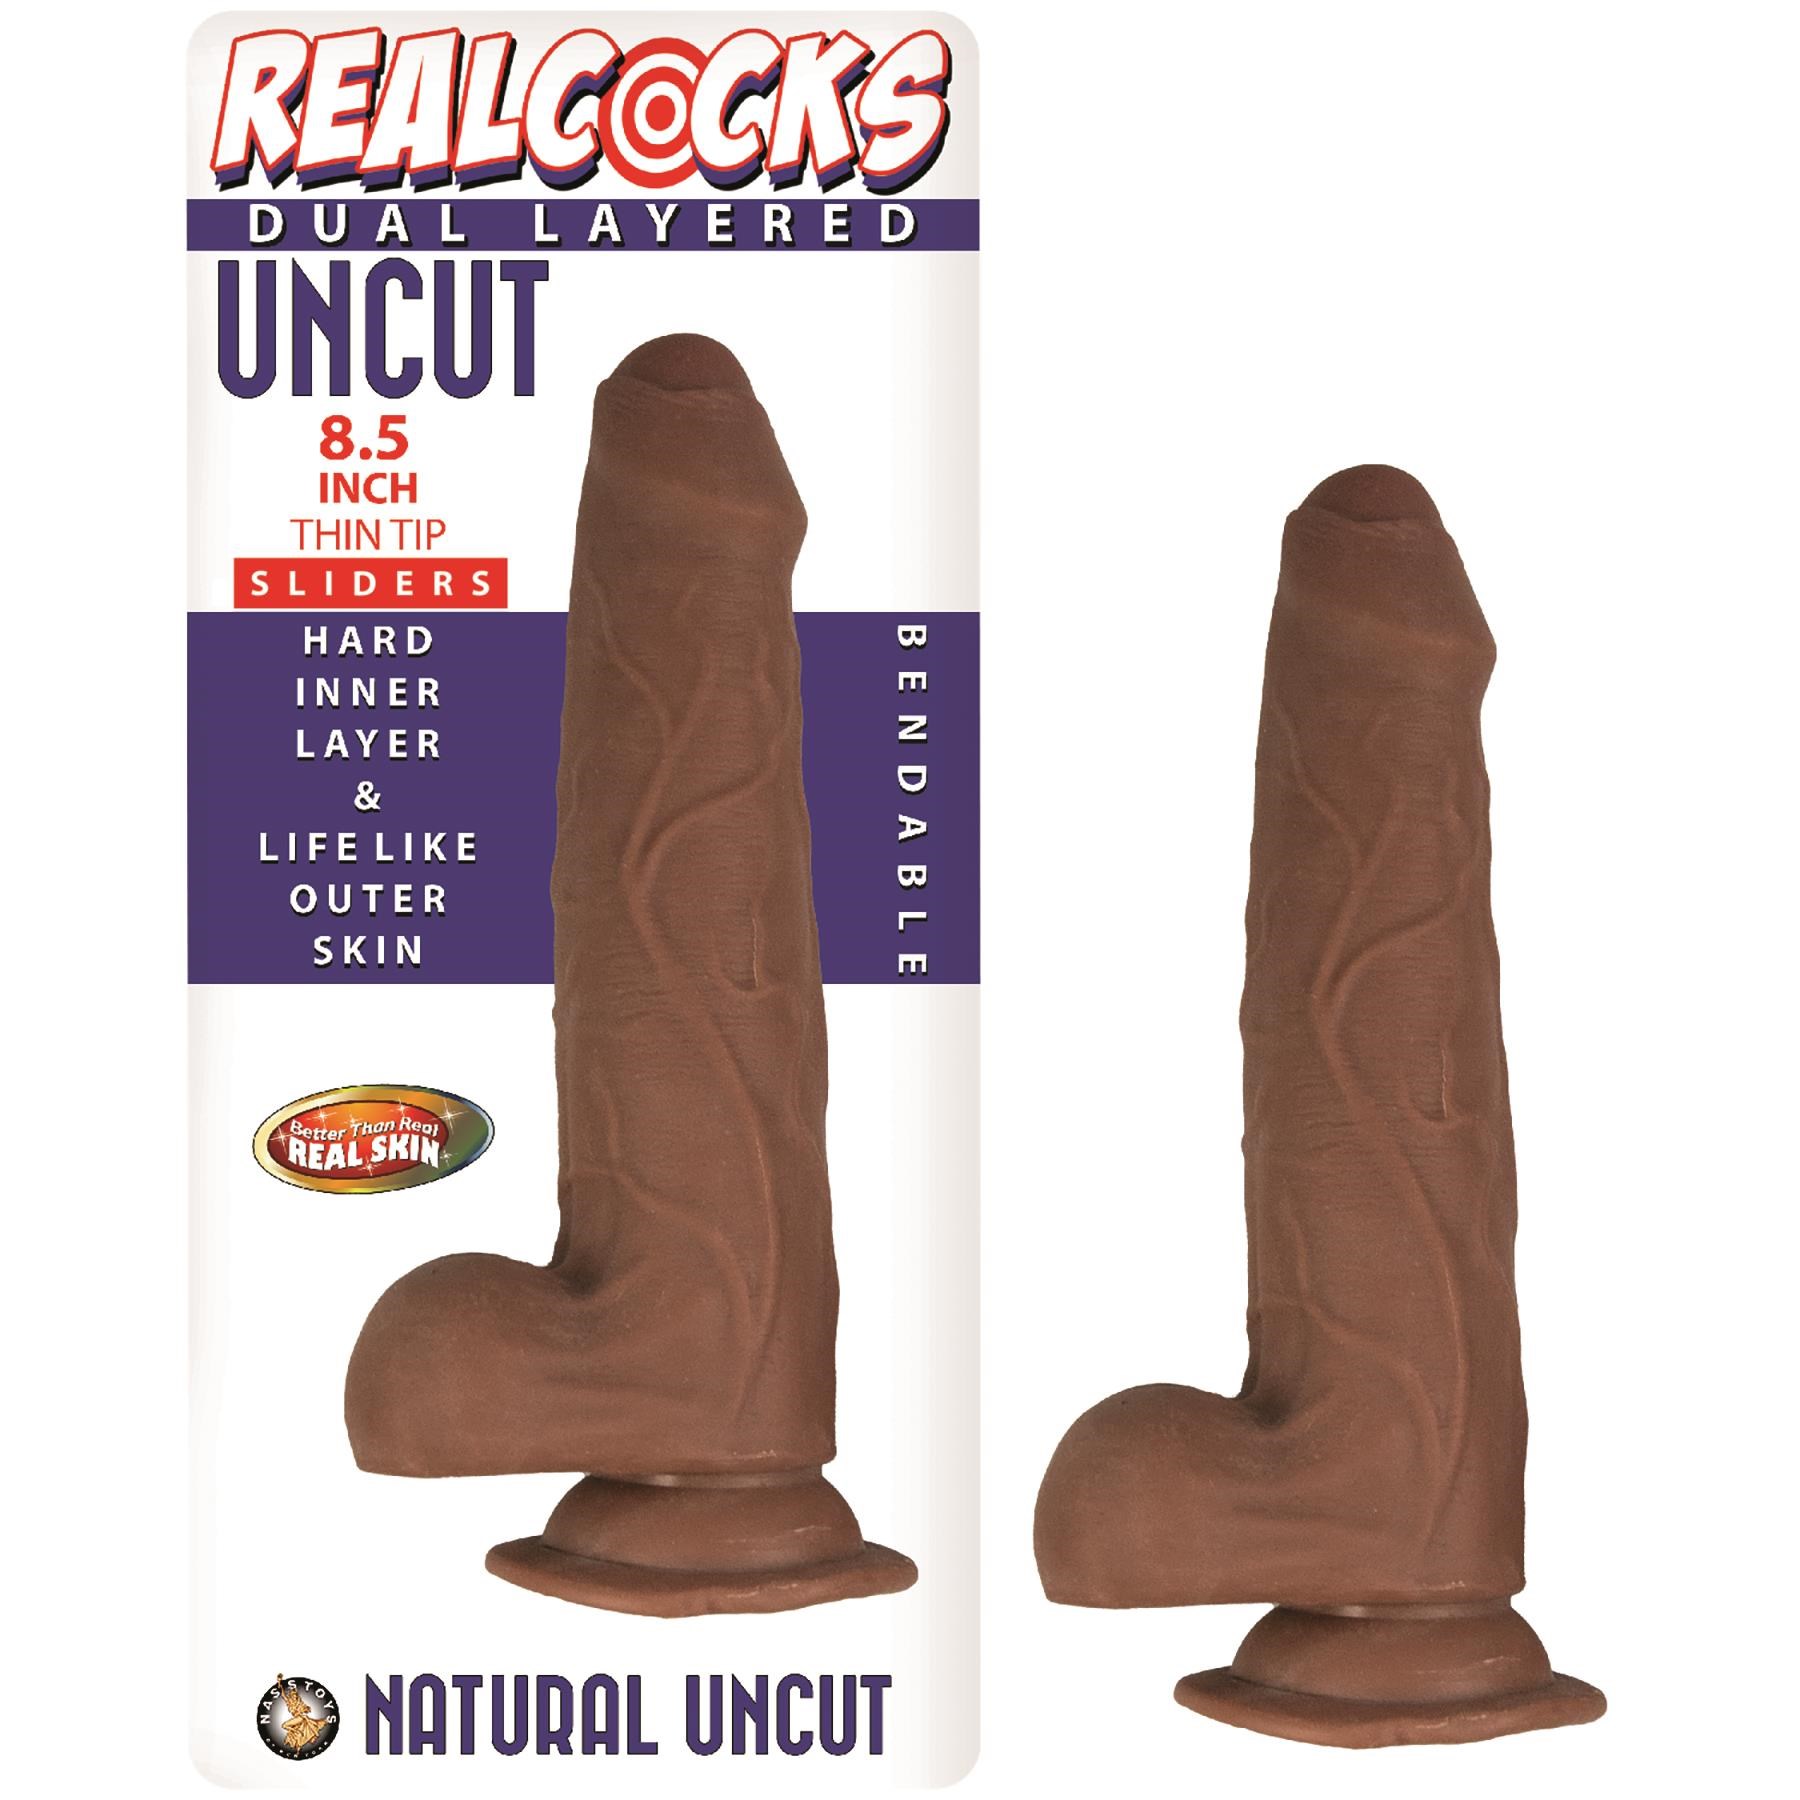 Realcocks 8.5 Inch Thin Tip Dual Layered Uncut Sliders Dildo - Product and Packaging - Brown